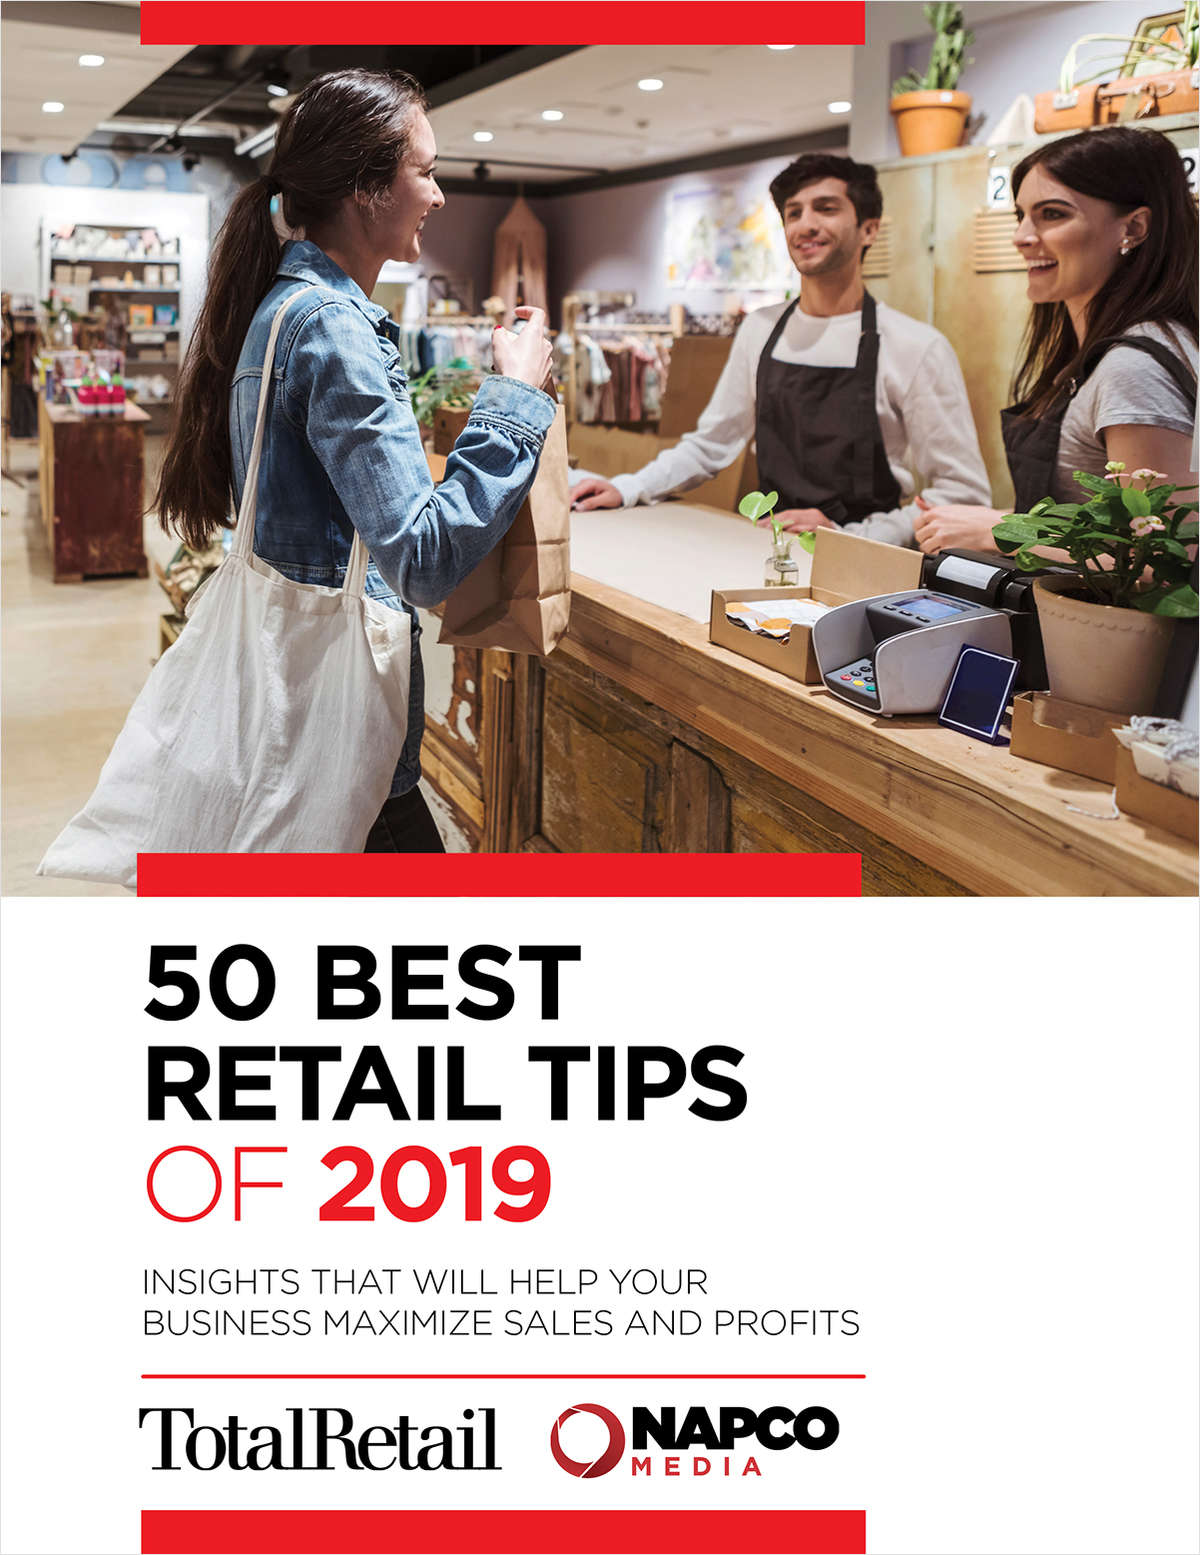 50 Best Retail Tips of 2019